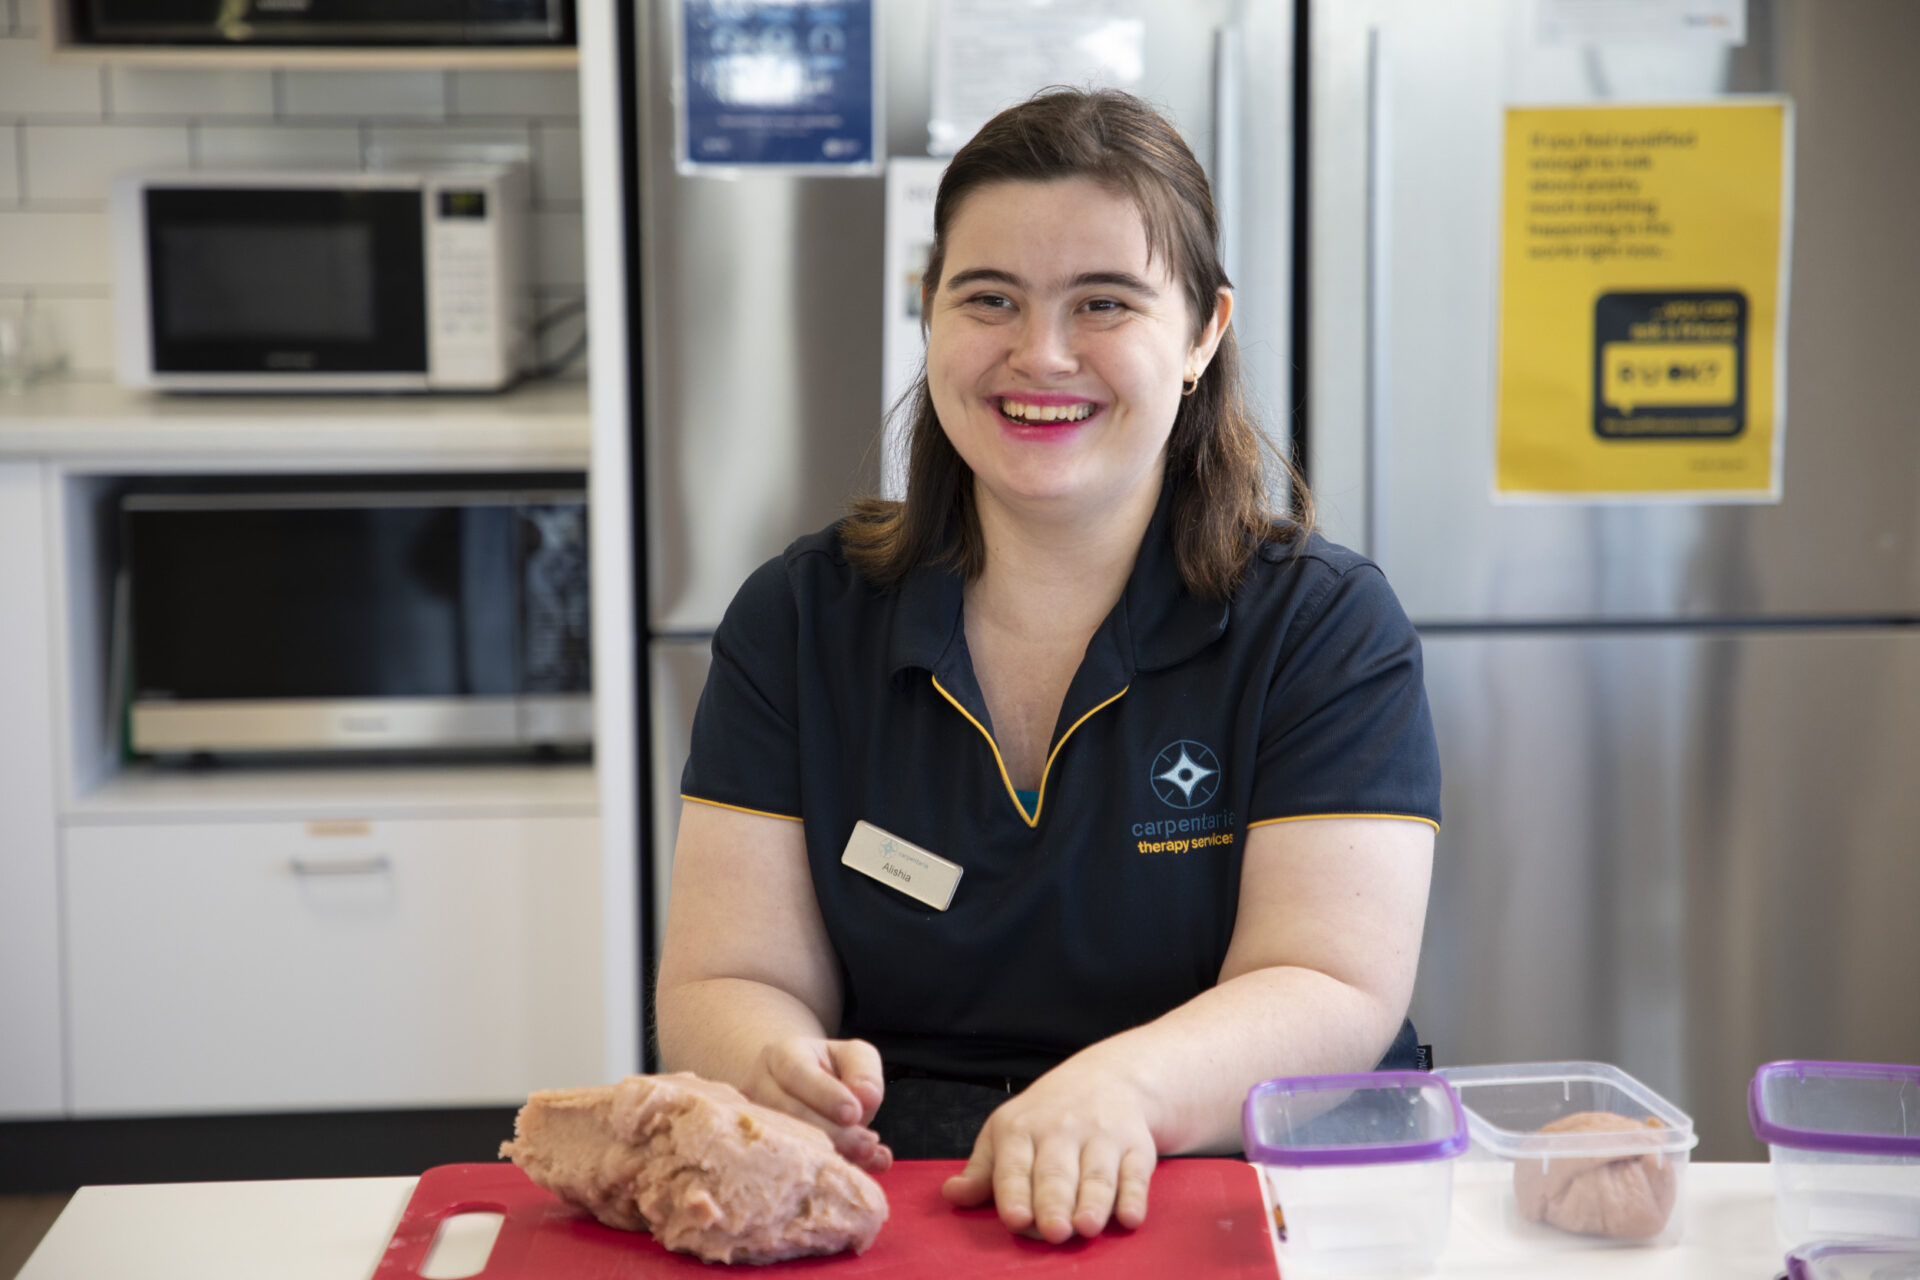 Alishia sits in a kitchen, making pink playdoh. She wears a Therapy Services polo shirt and is smiling